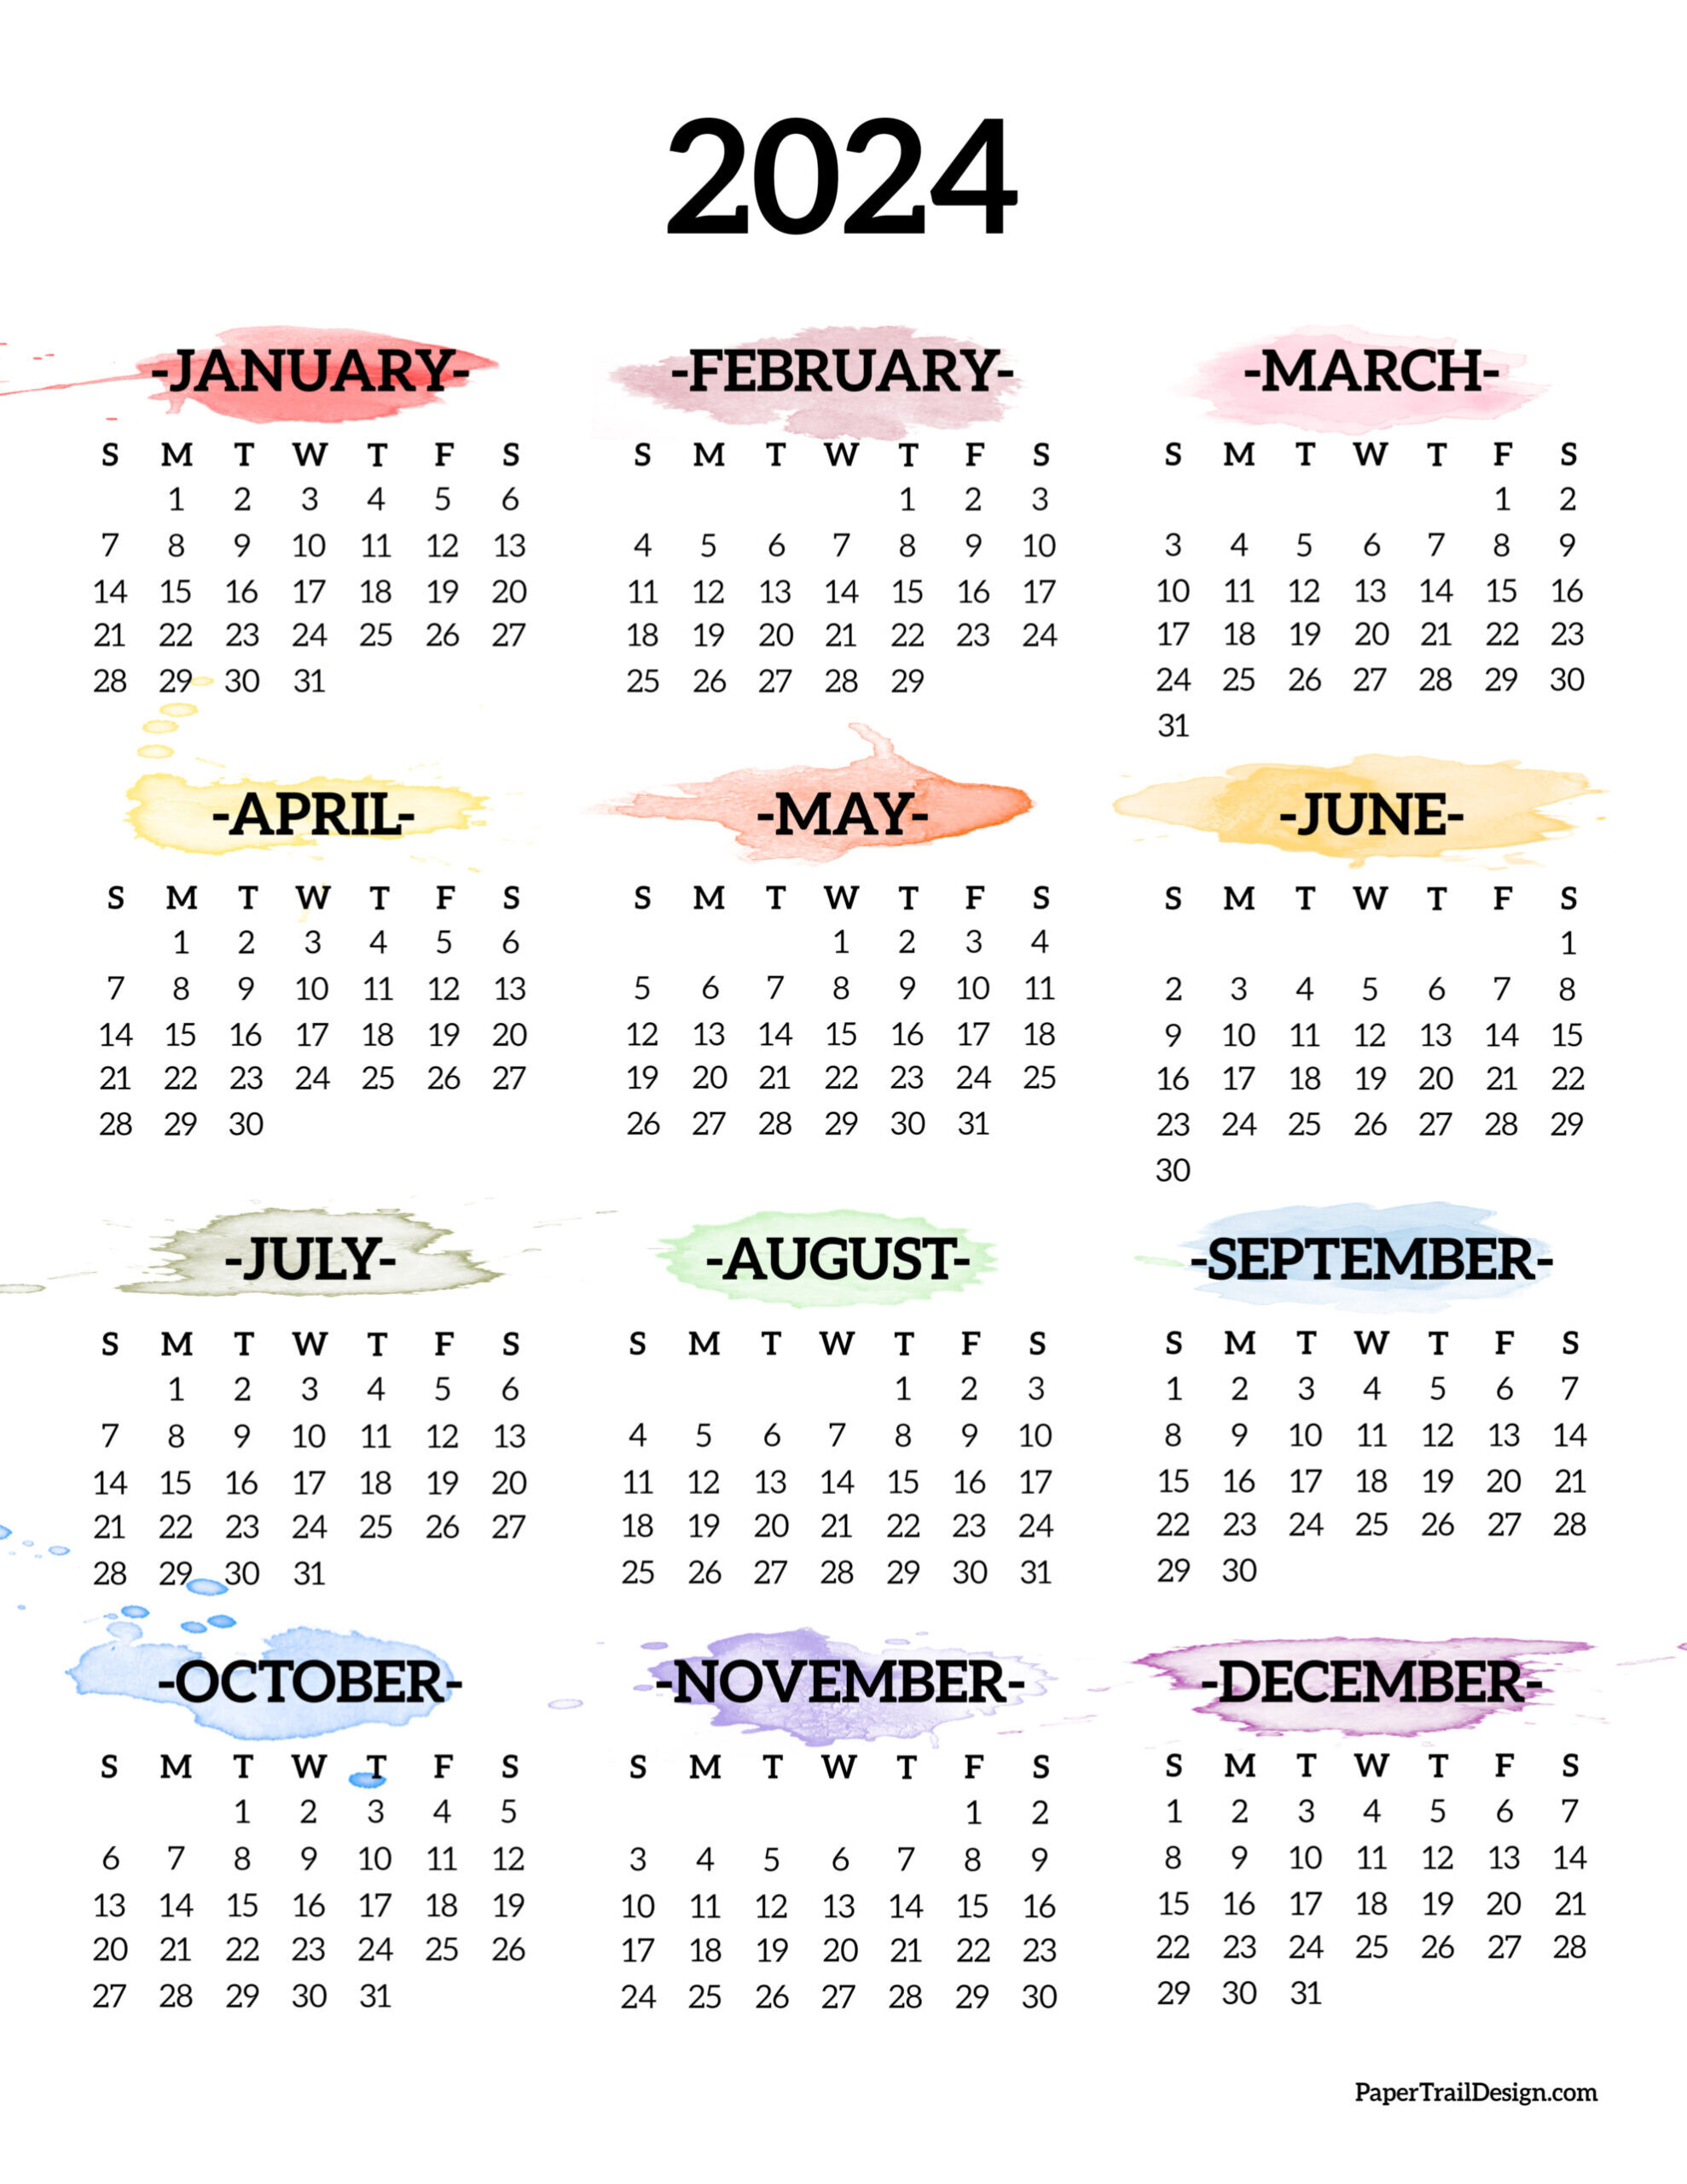 Calendar 2024 Printable One Page - Paper Trail Design for Year On A Page Calendar 2024 Printable